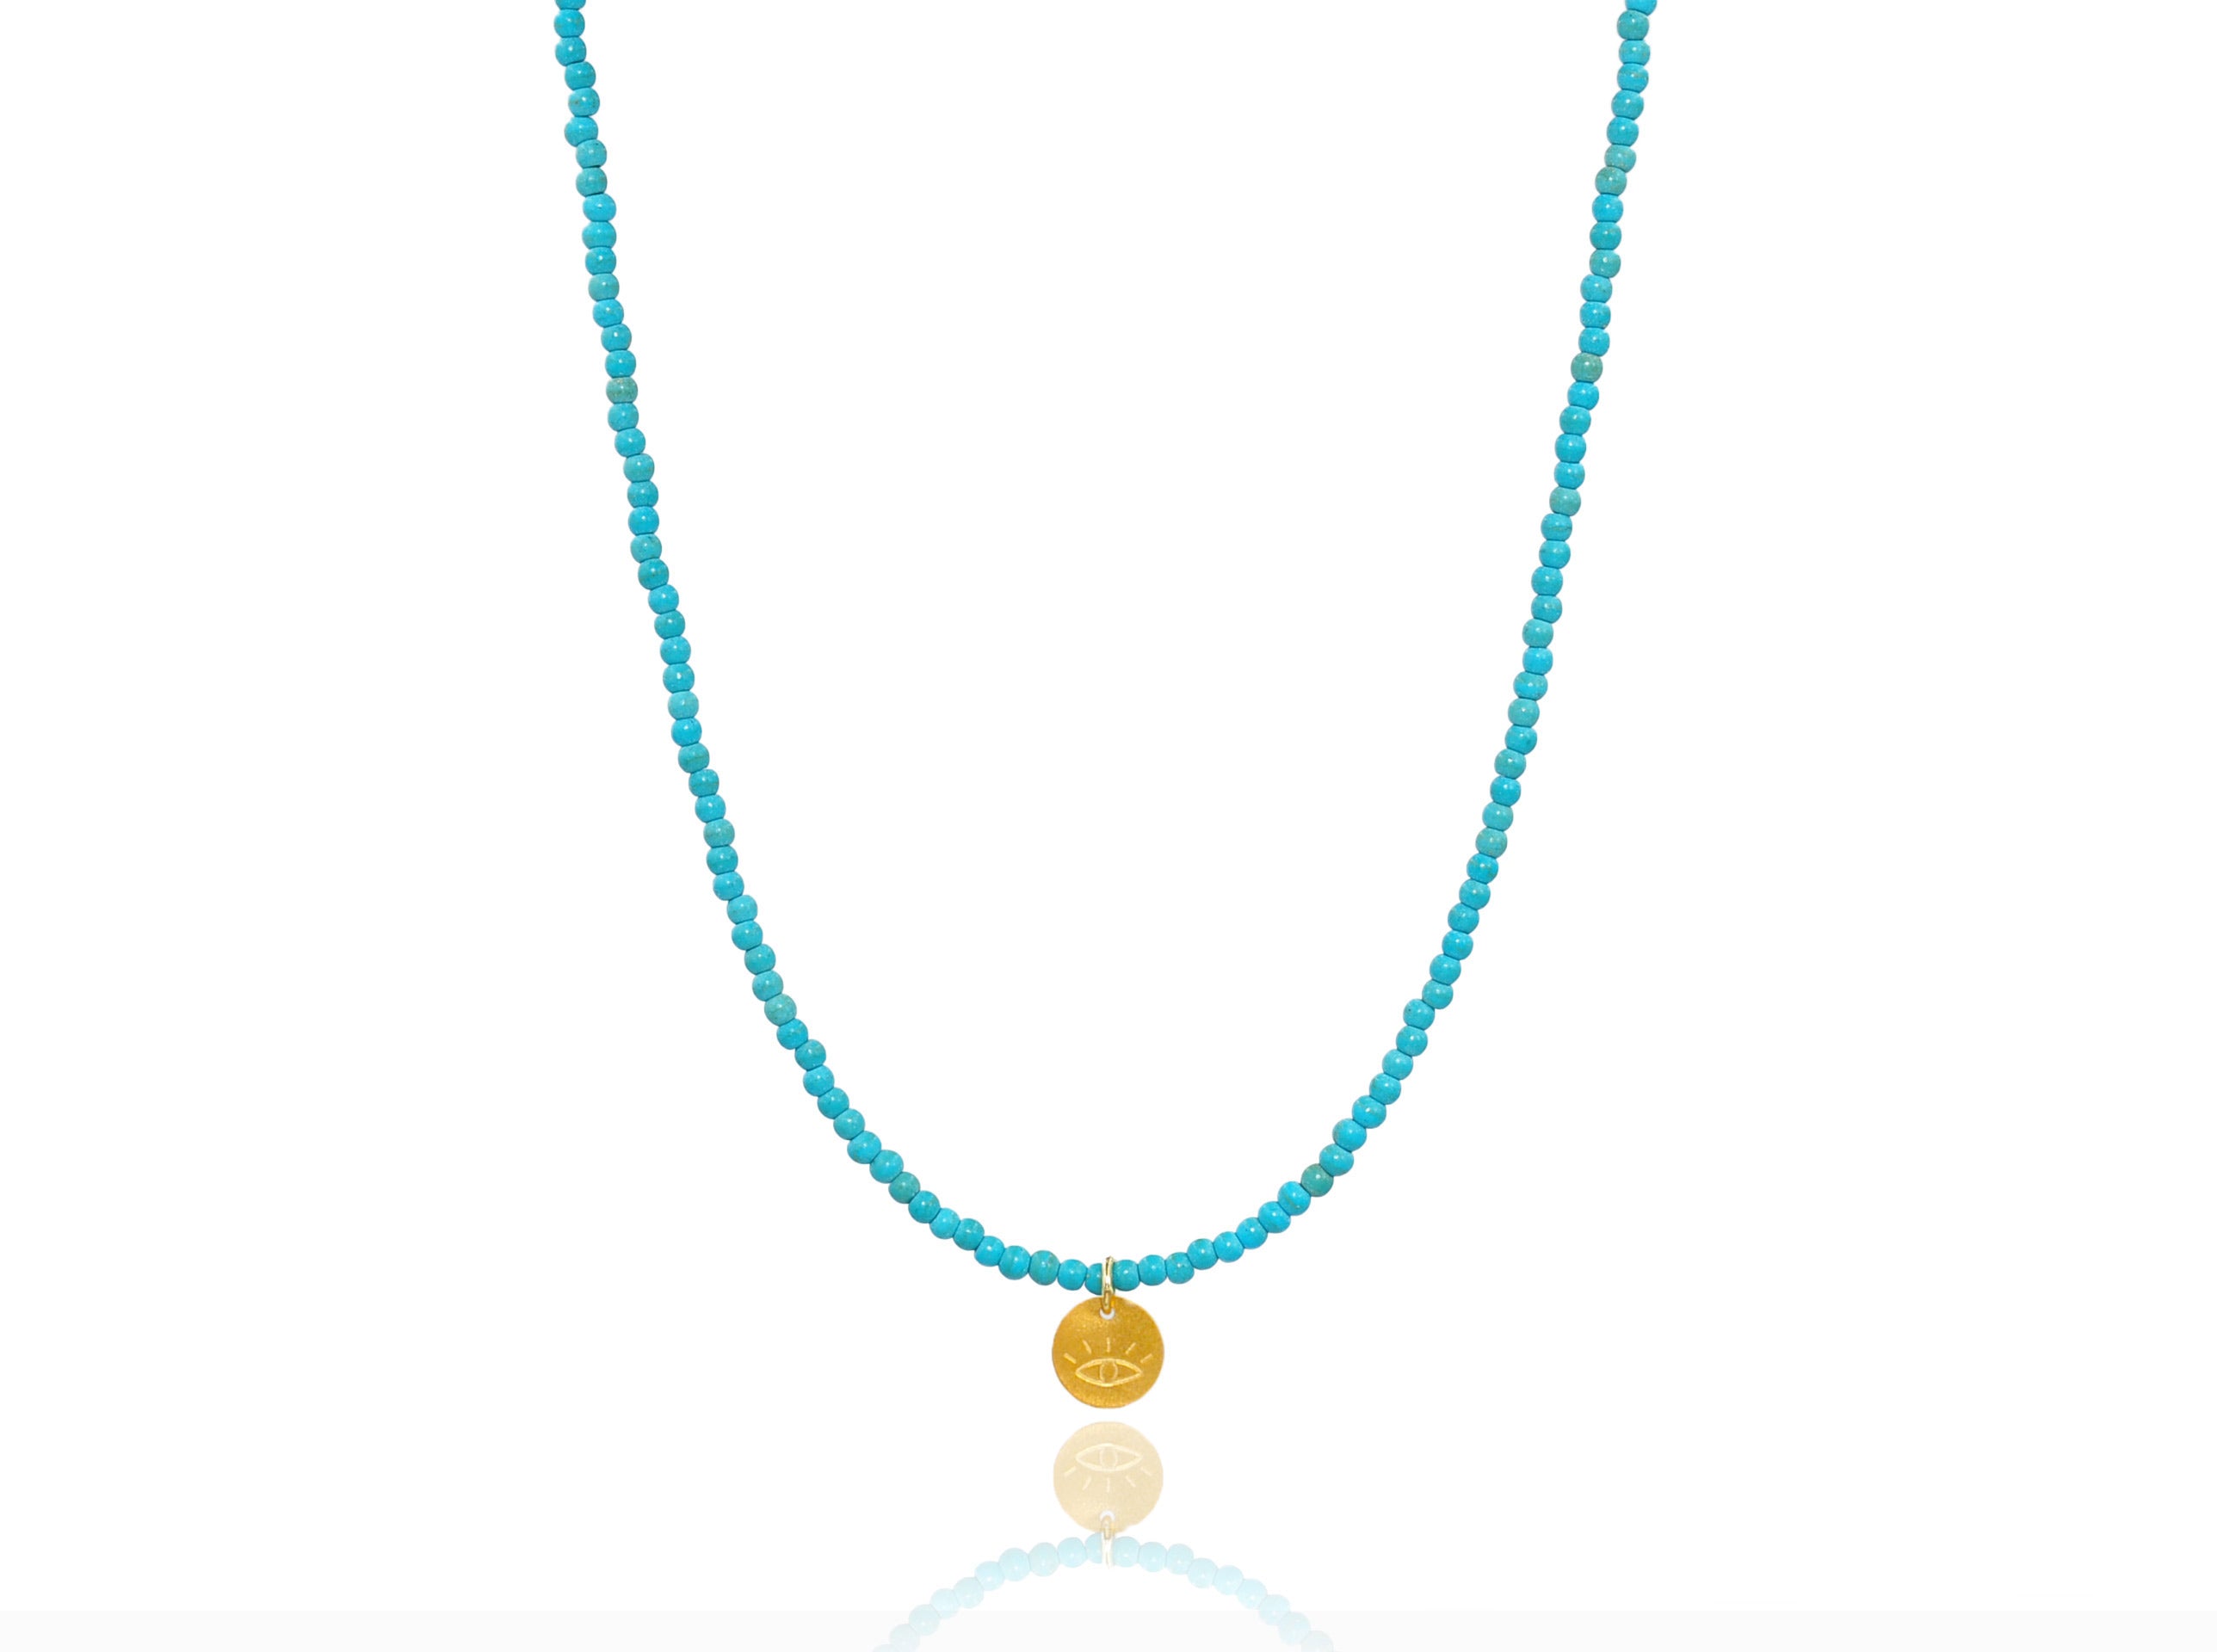 Turquoise 'Lucky Eye' Necklace